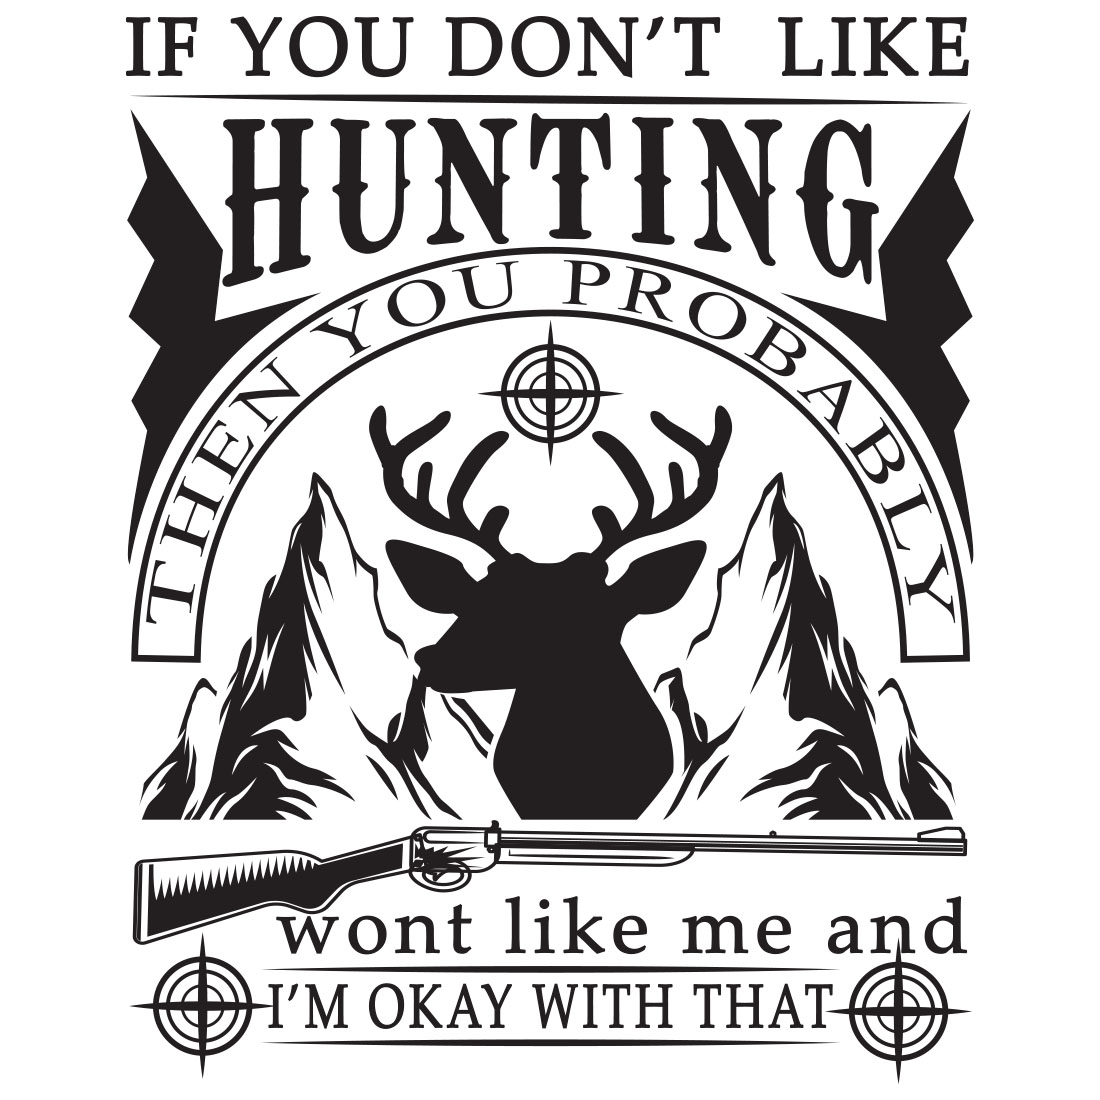 IF YOU DON’T LIKE HUNTINH THEN YOU PROBABLY WONT LIKE ME AND I’M OKAY WITH THAT cover image.